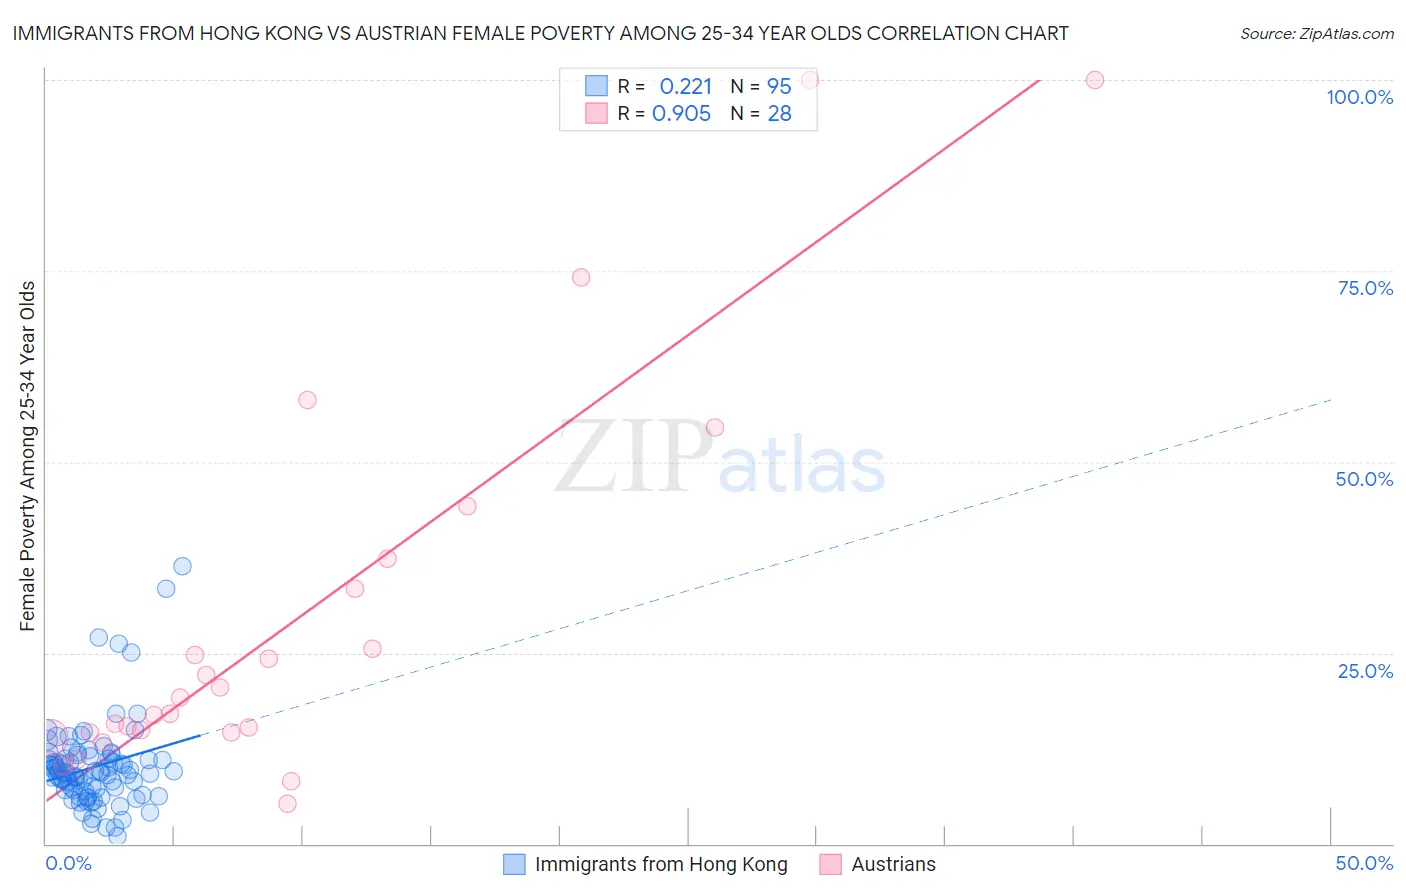 Immigrants from Hong Kong vs Austrian Female Poverty Among 25-34 Year Olds